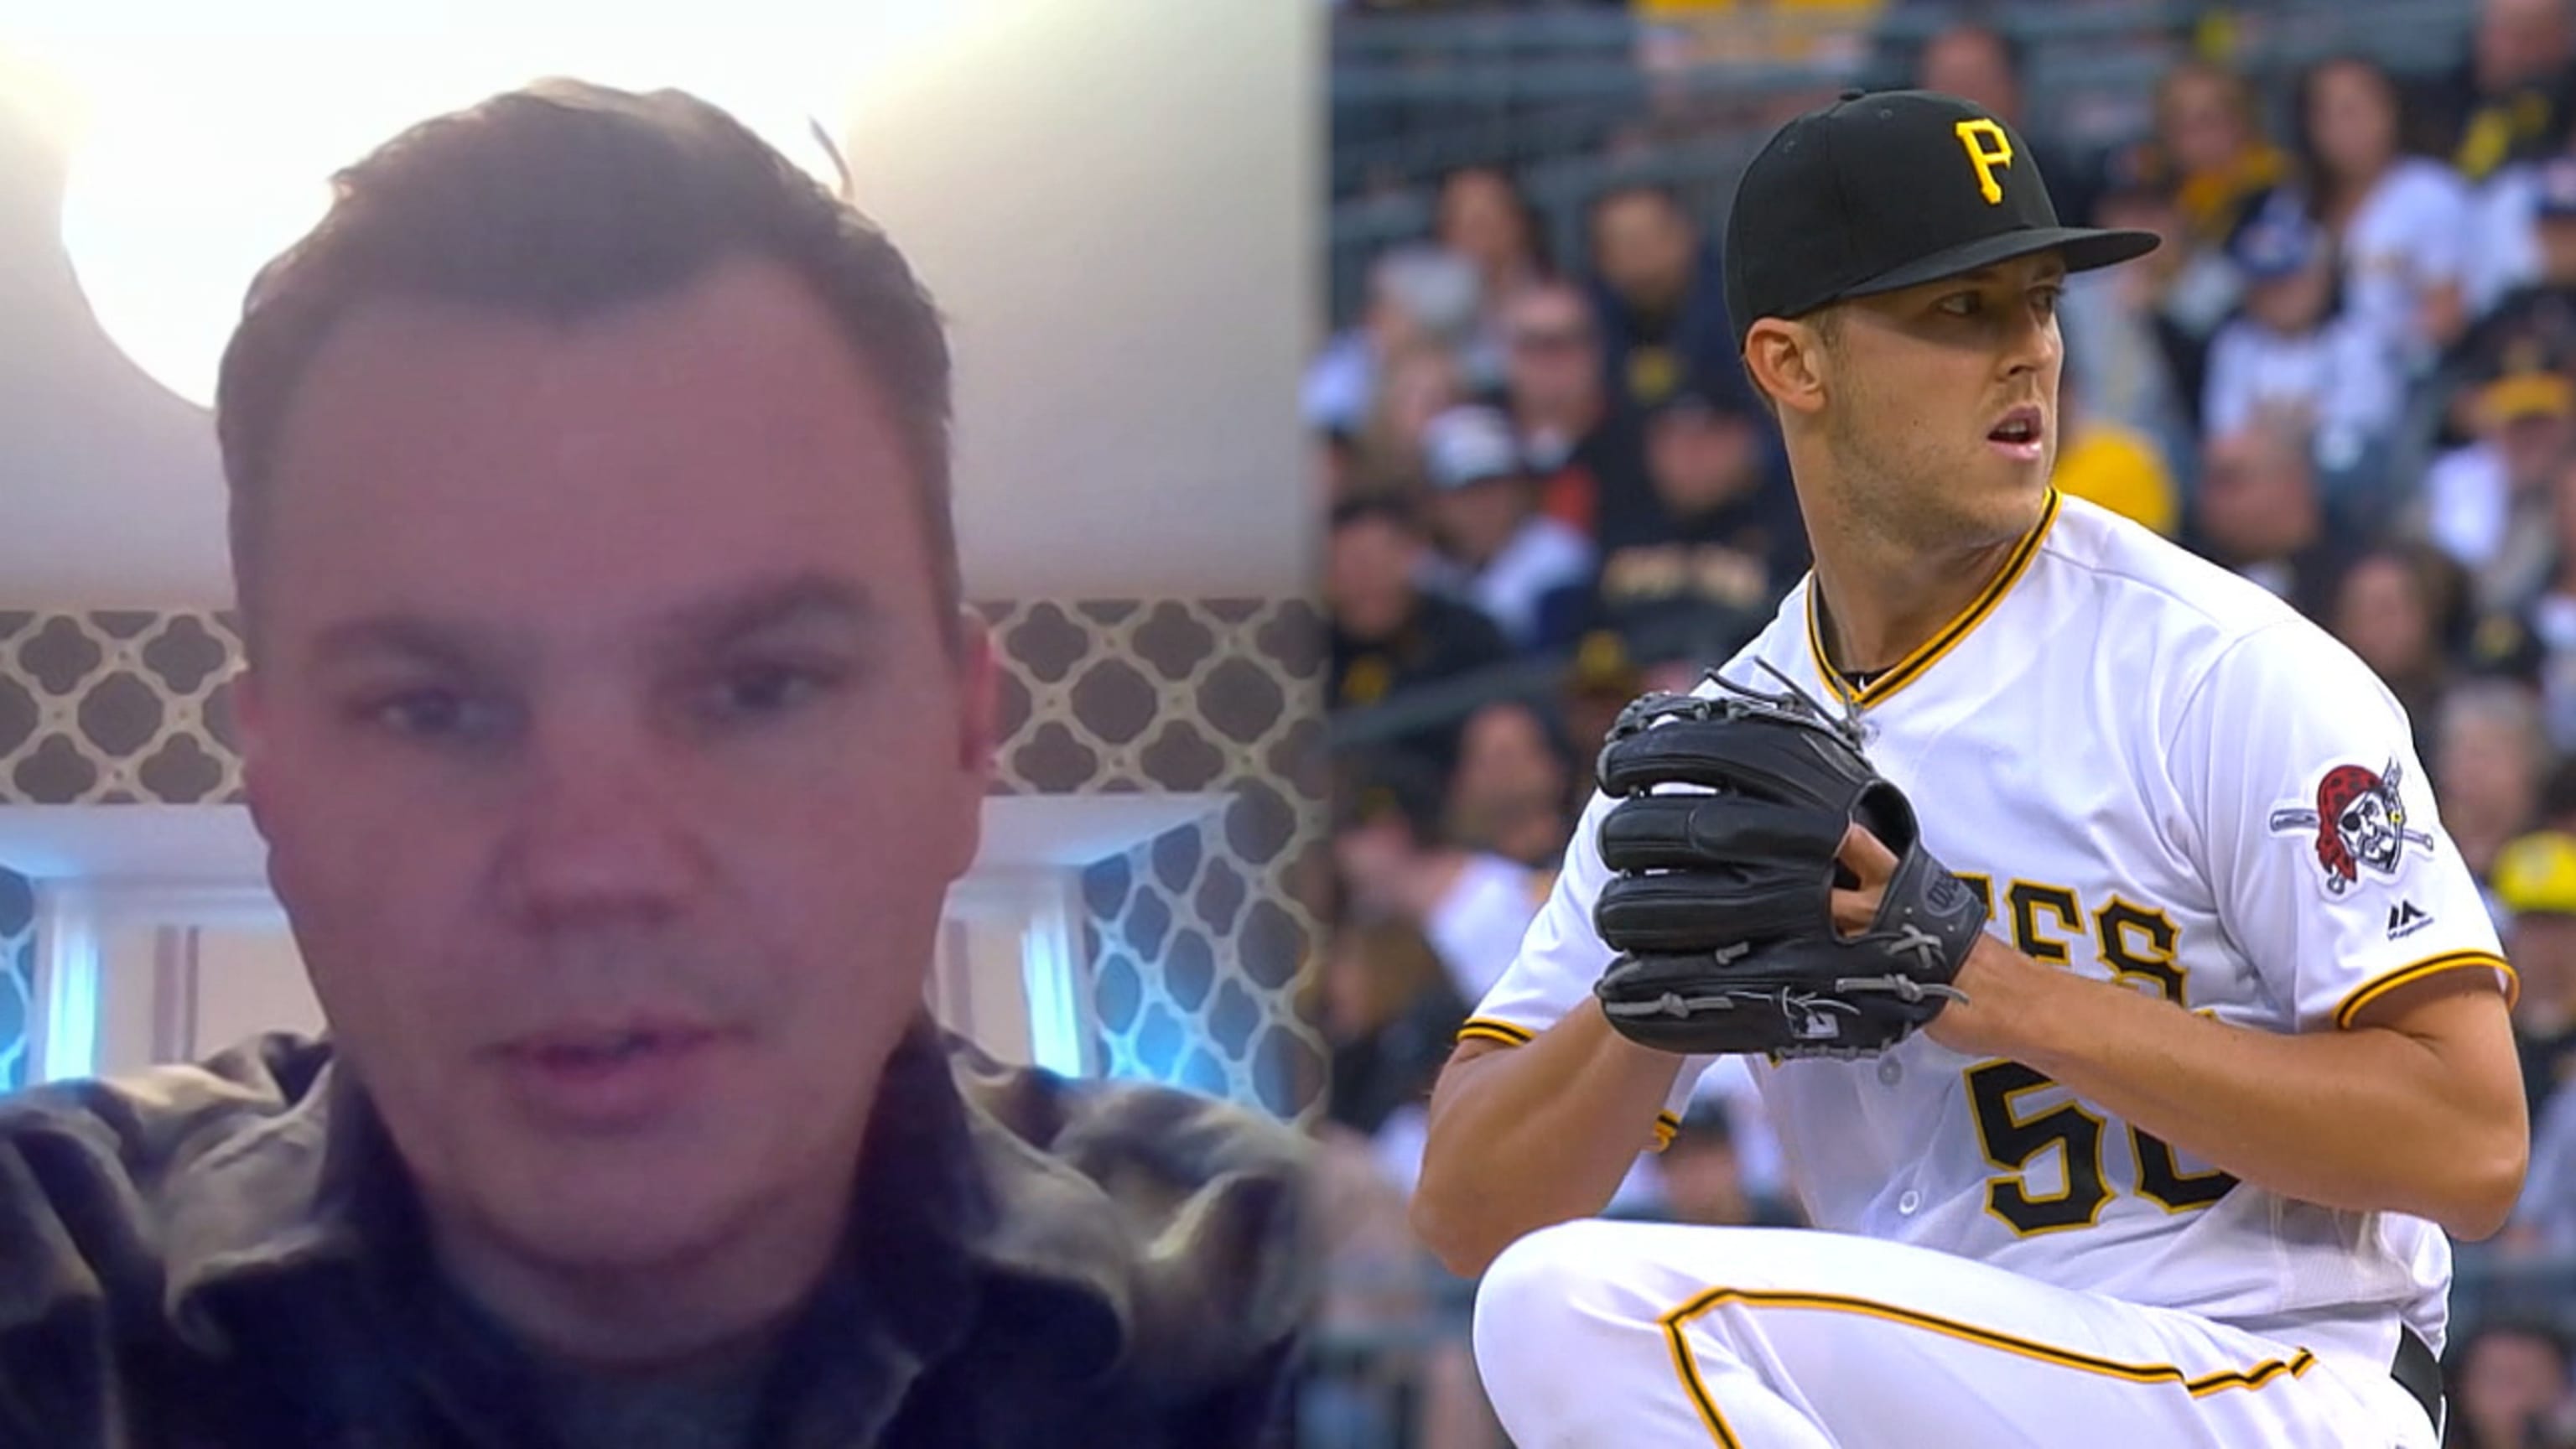 Pirates trade Jameson Taillon for prospects, reuniting him with